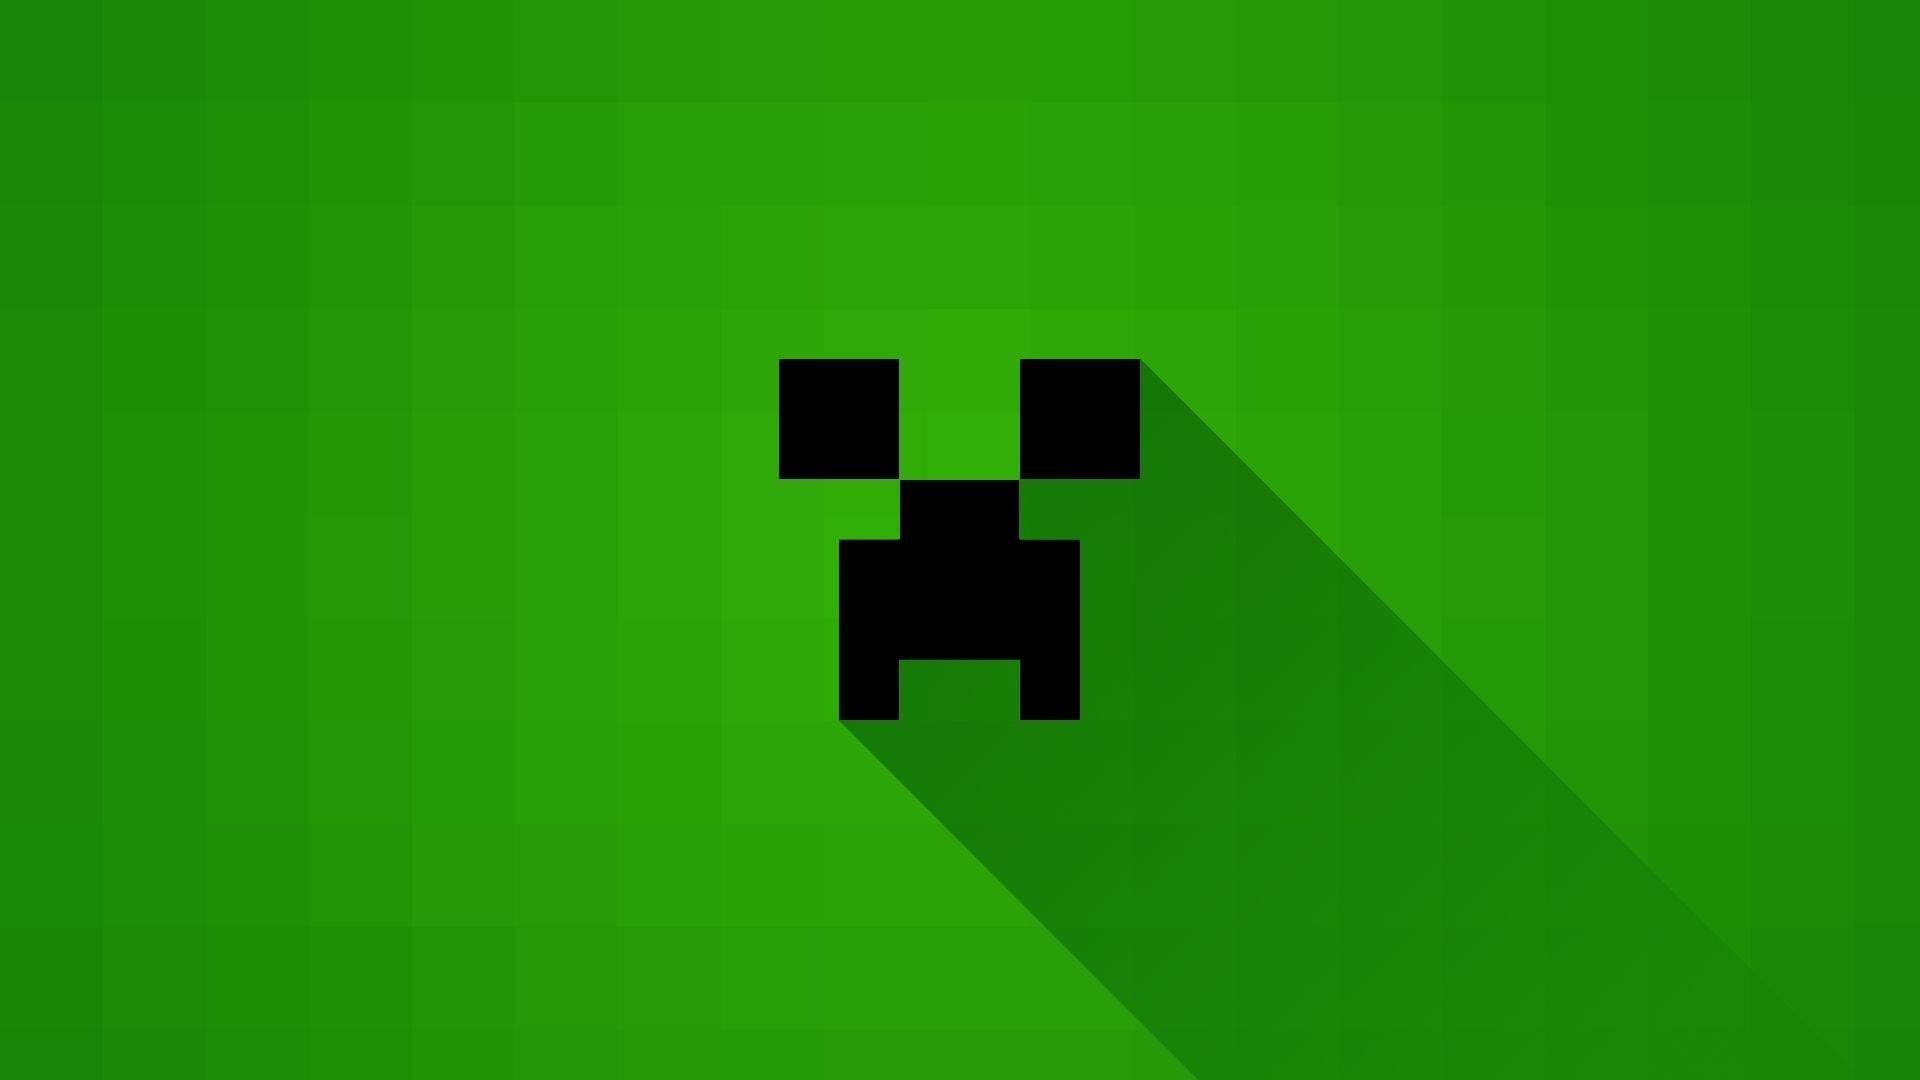 wallpapers for Minecraft PE (Pocket Edition) - Free Pro wallpapers for MCPE  by WENJUAN HU